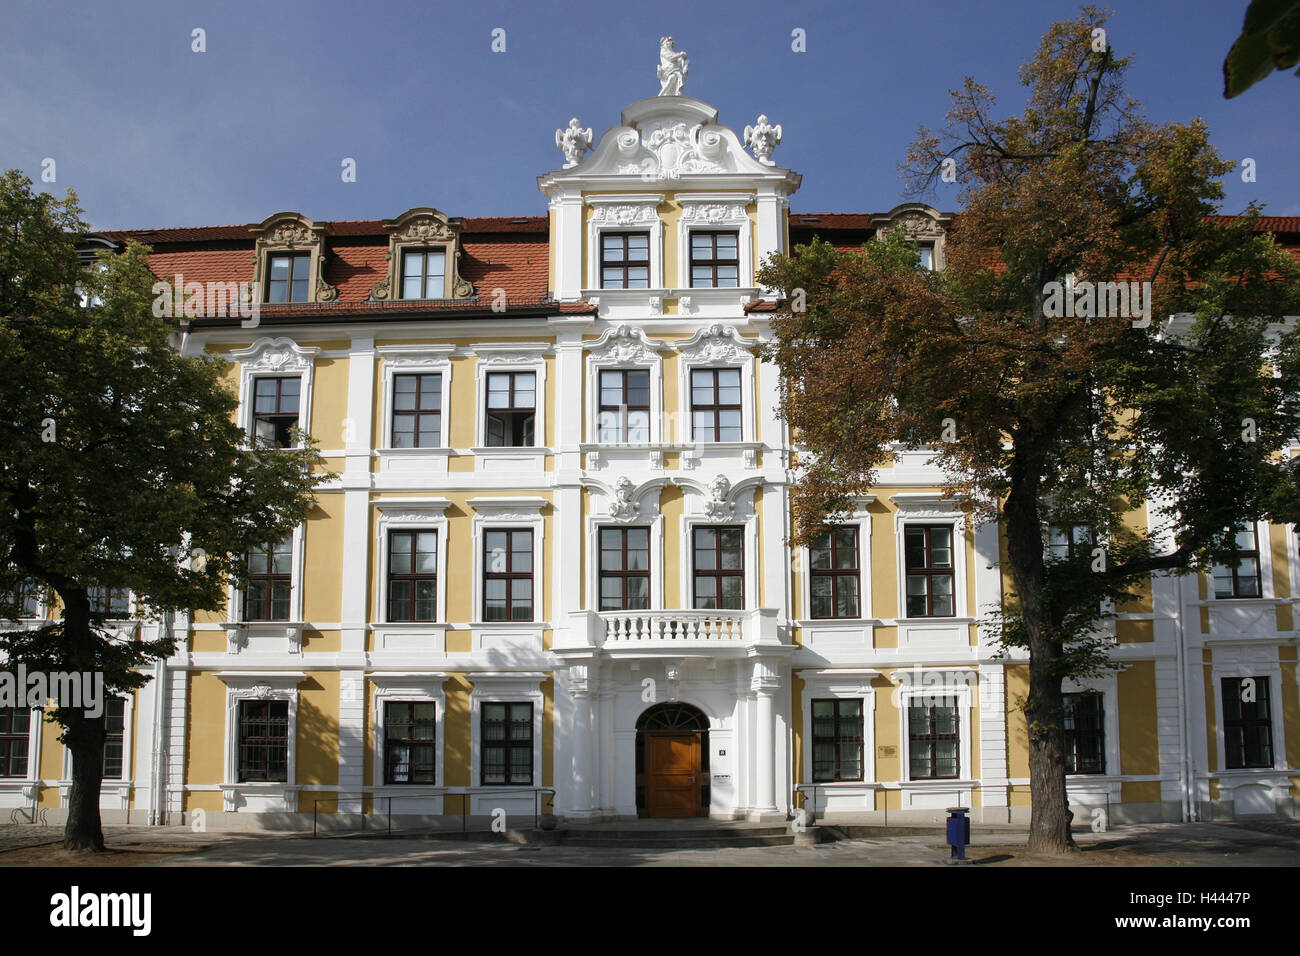 Germany, Saxony-Anhalt, Magdeburg, Landtag, outside view, detail, town, city centre, houses, buildings, government buildings, Landtag buildings, parliament seat, baroque, stylises, baroque ensemble, deserted, architecture, architecture, Stock Photo